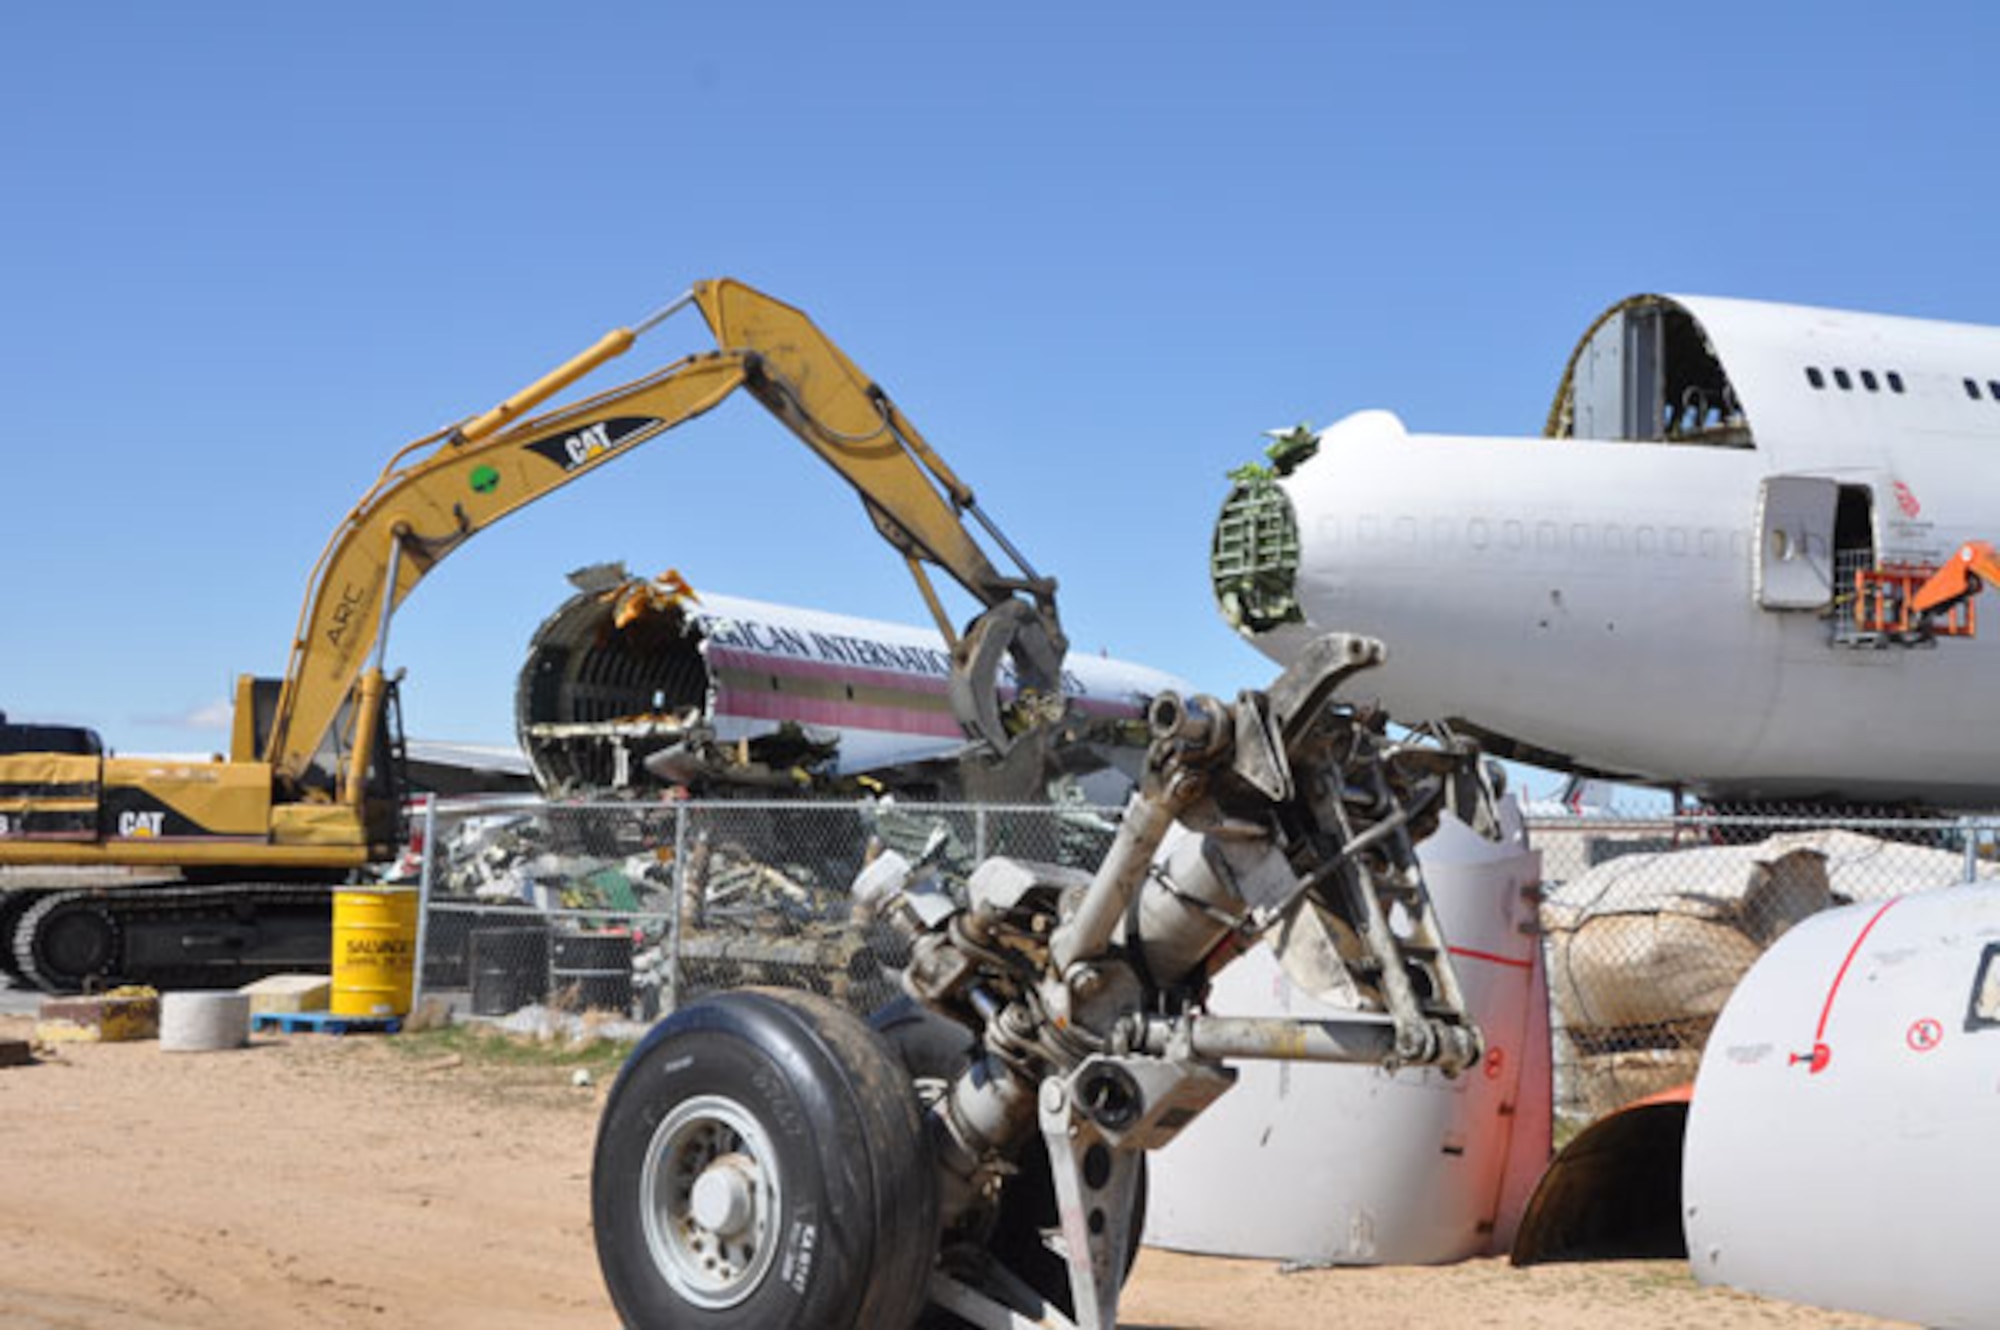 Some aircraft spend their final days at the former George Air Force Base in Victorville, Calif., being broken down into component parts by the Aircraft Recycling Corporation.  (Photo by Scott Johnston)